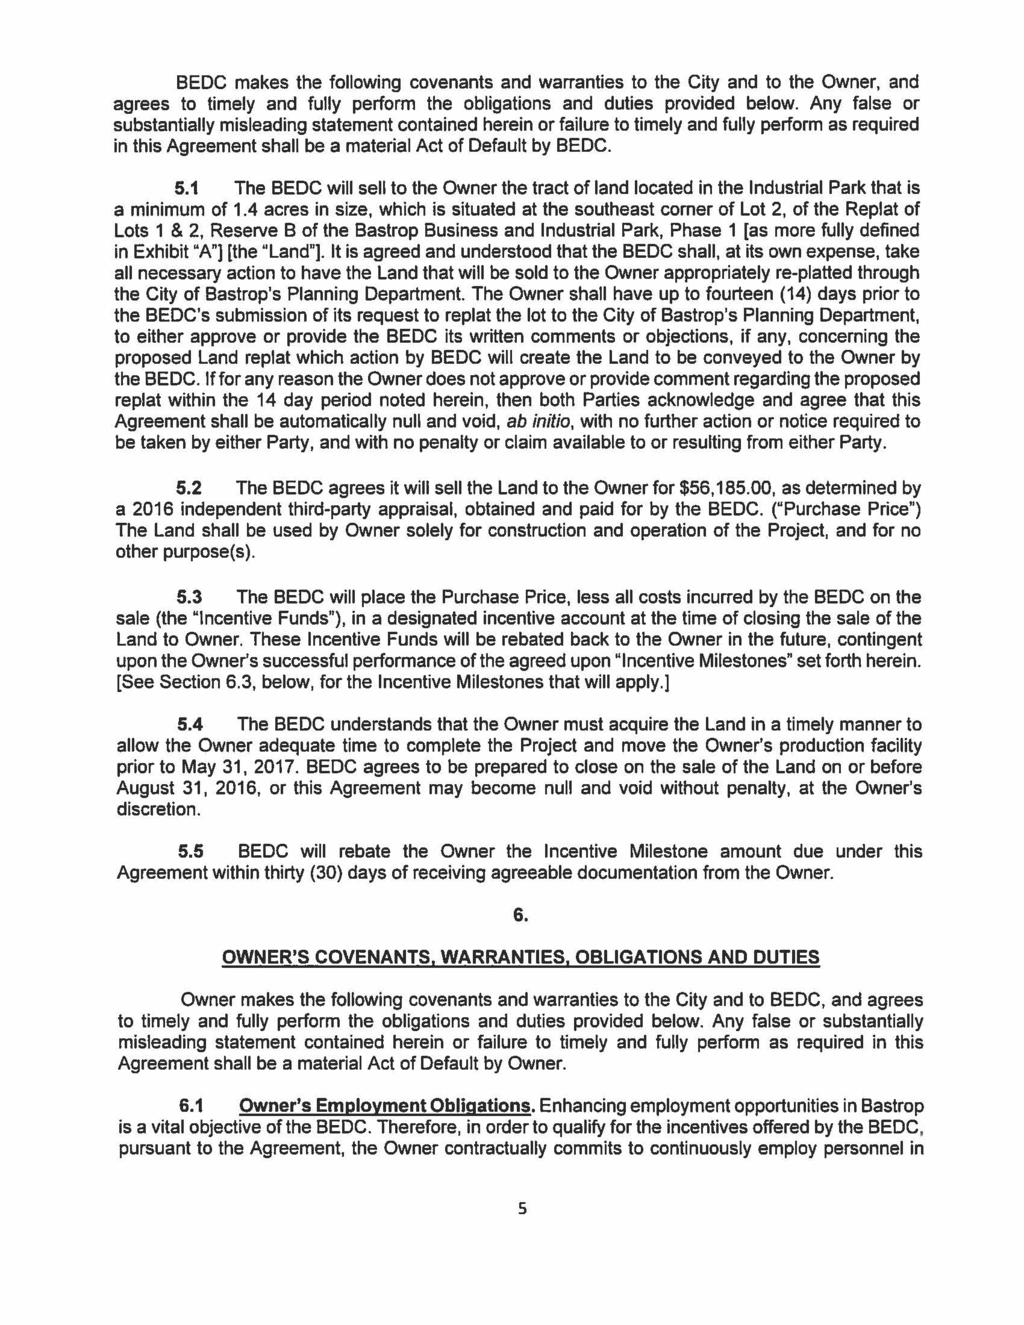 01/24/2019 47 BEDC makes the following covenants and warranties to the City and to the Owner, and agrees to timely and fully perform the obligations and duties provided below.